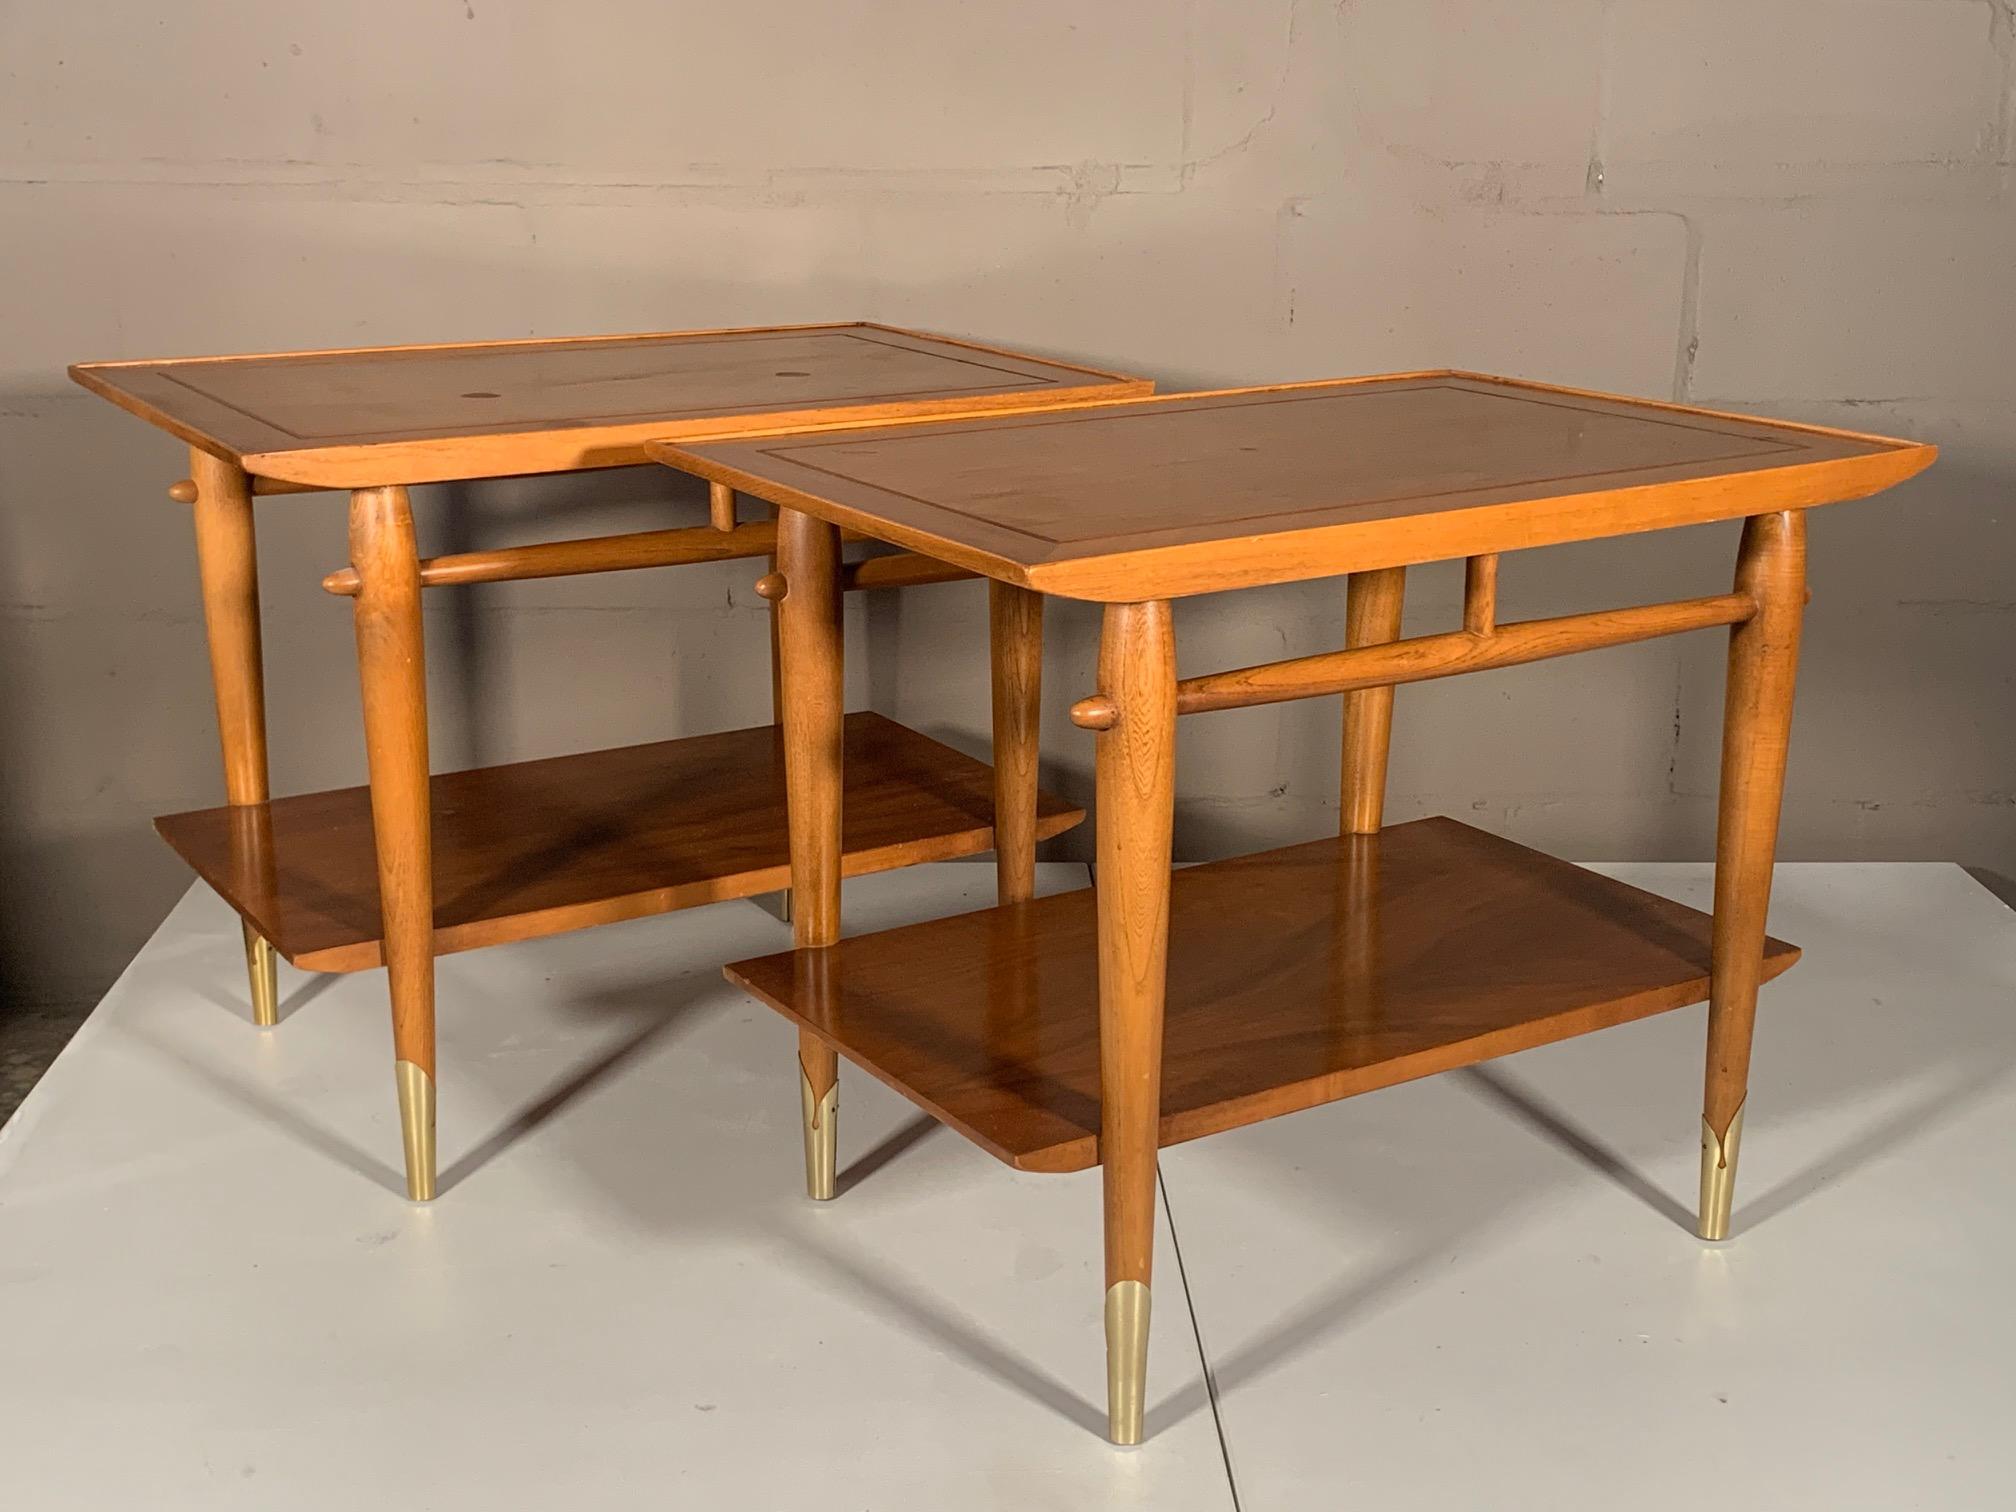 Mid-20th Century Pair of Unusual Side Tables by Lane from the 